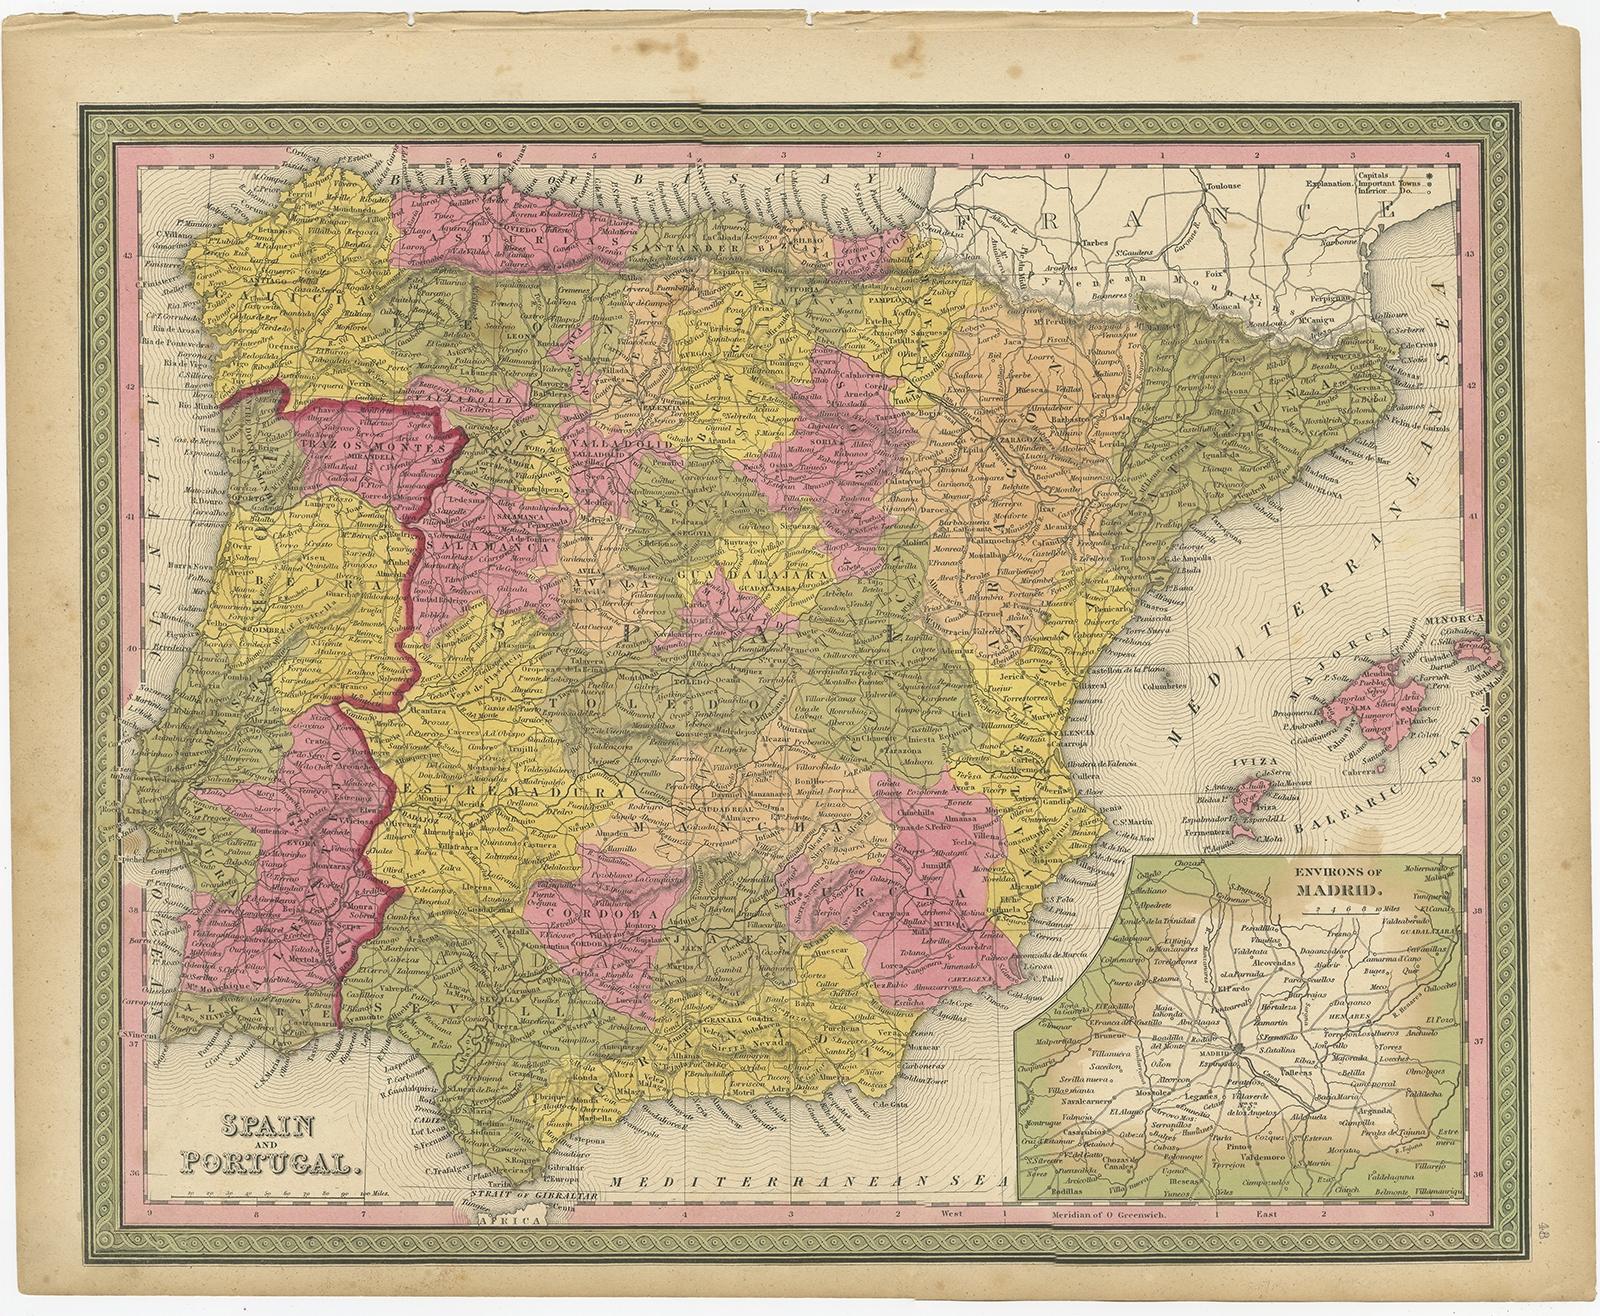 Antique map titled 'Kingdom of Spain and Portugal'. 

Old map of Spain and Portugal, with an inset map of the region of Madrid. This map originates from 'A New Universal Atlas Containing Maps of the various Empires, Kingdoms, States and Republics